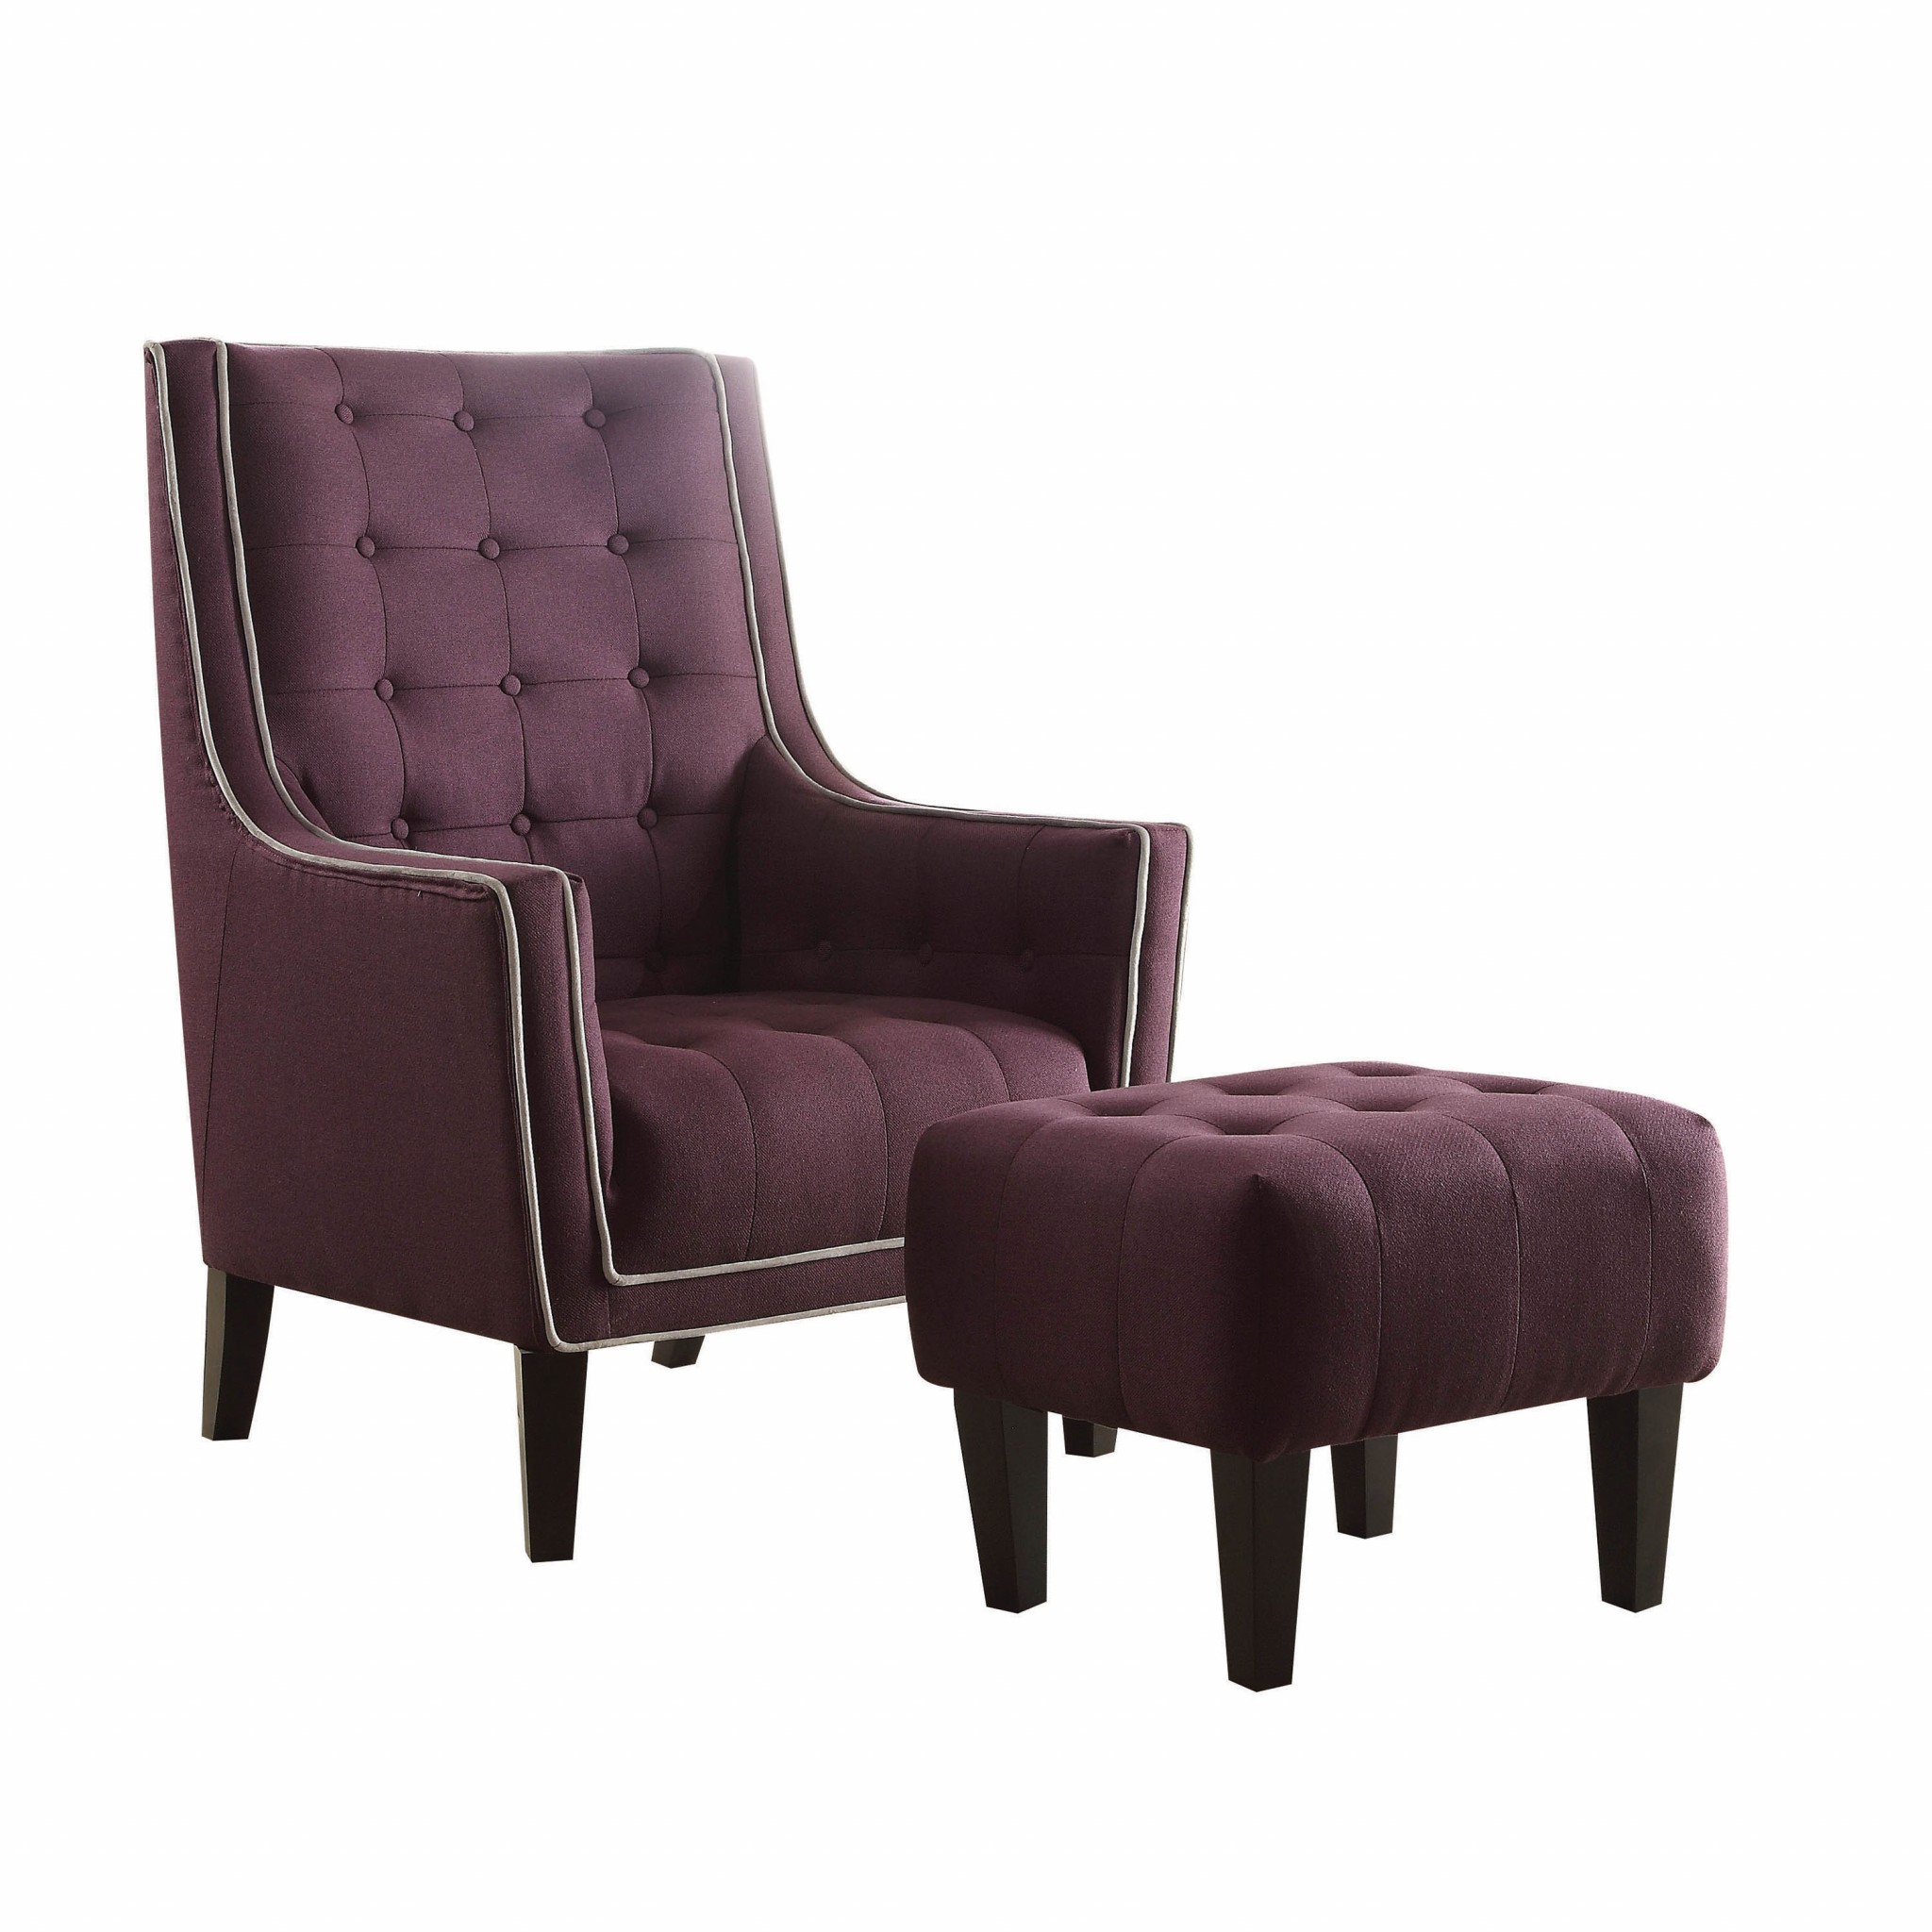 32" X 33" X 46" Purple Linen Accent Arm Chair And Ottoman